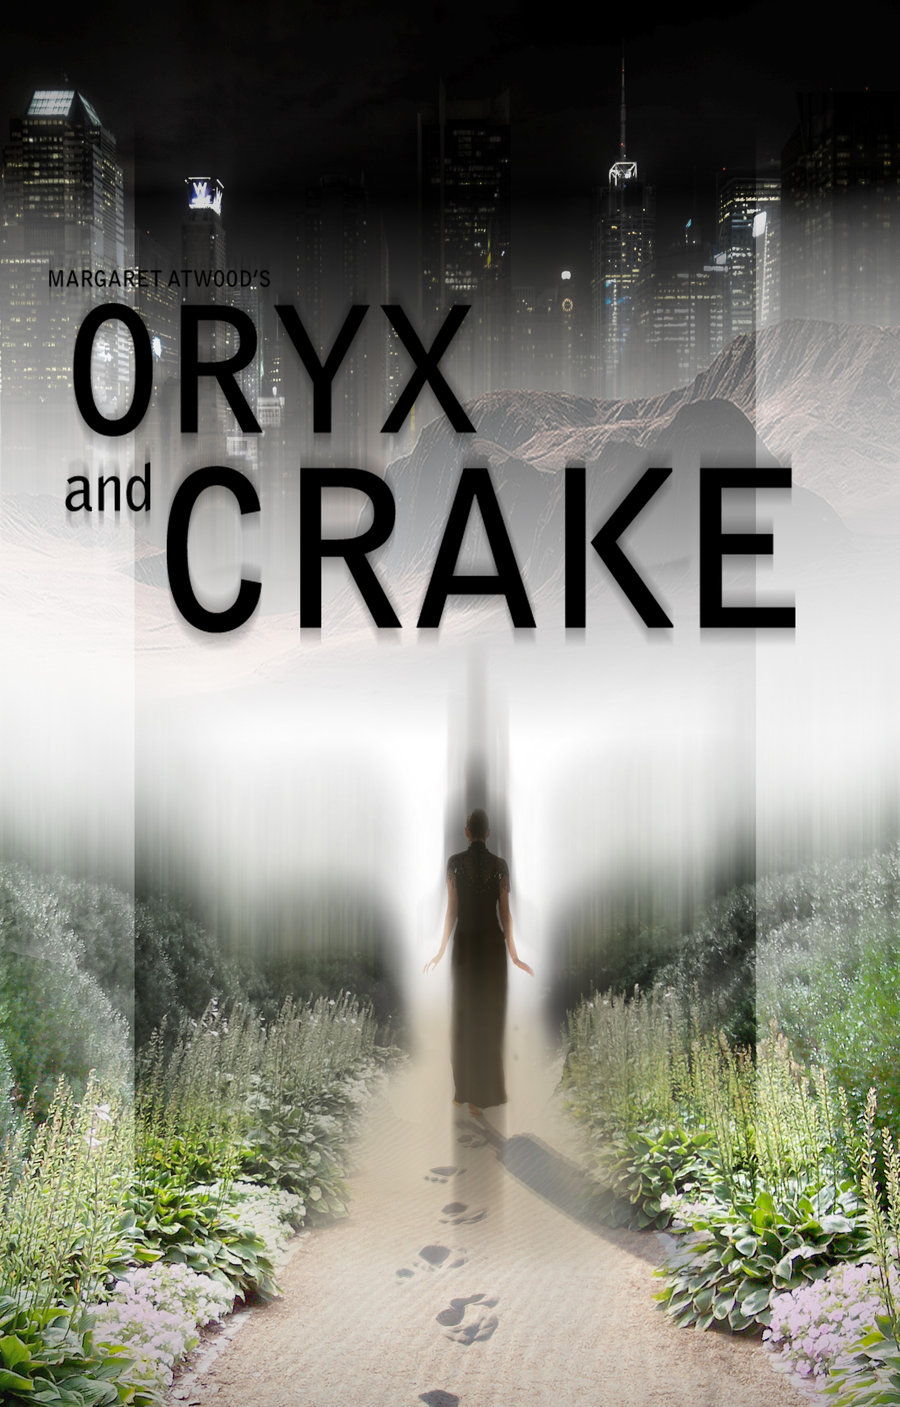 ORYX___CRAKE_MOVIE_POSTER__2__by_shuikyou